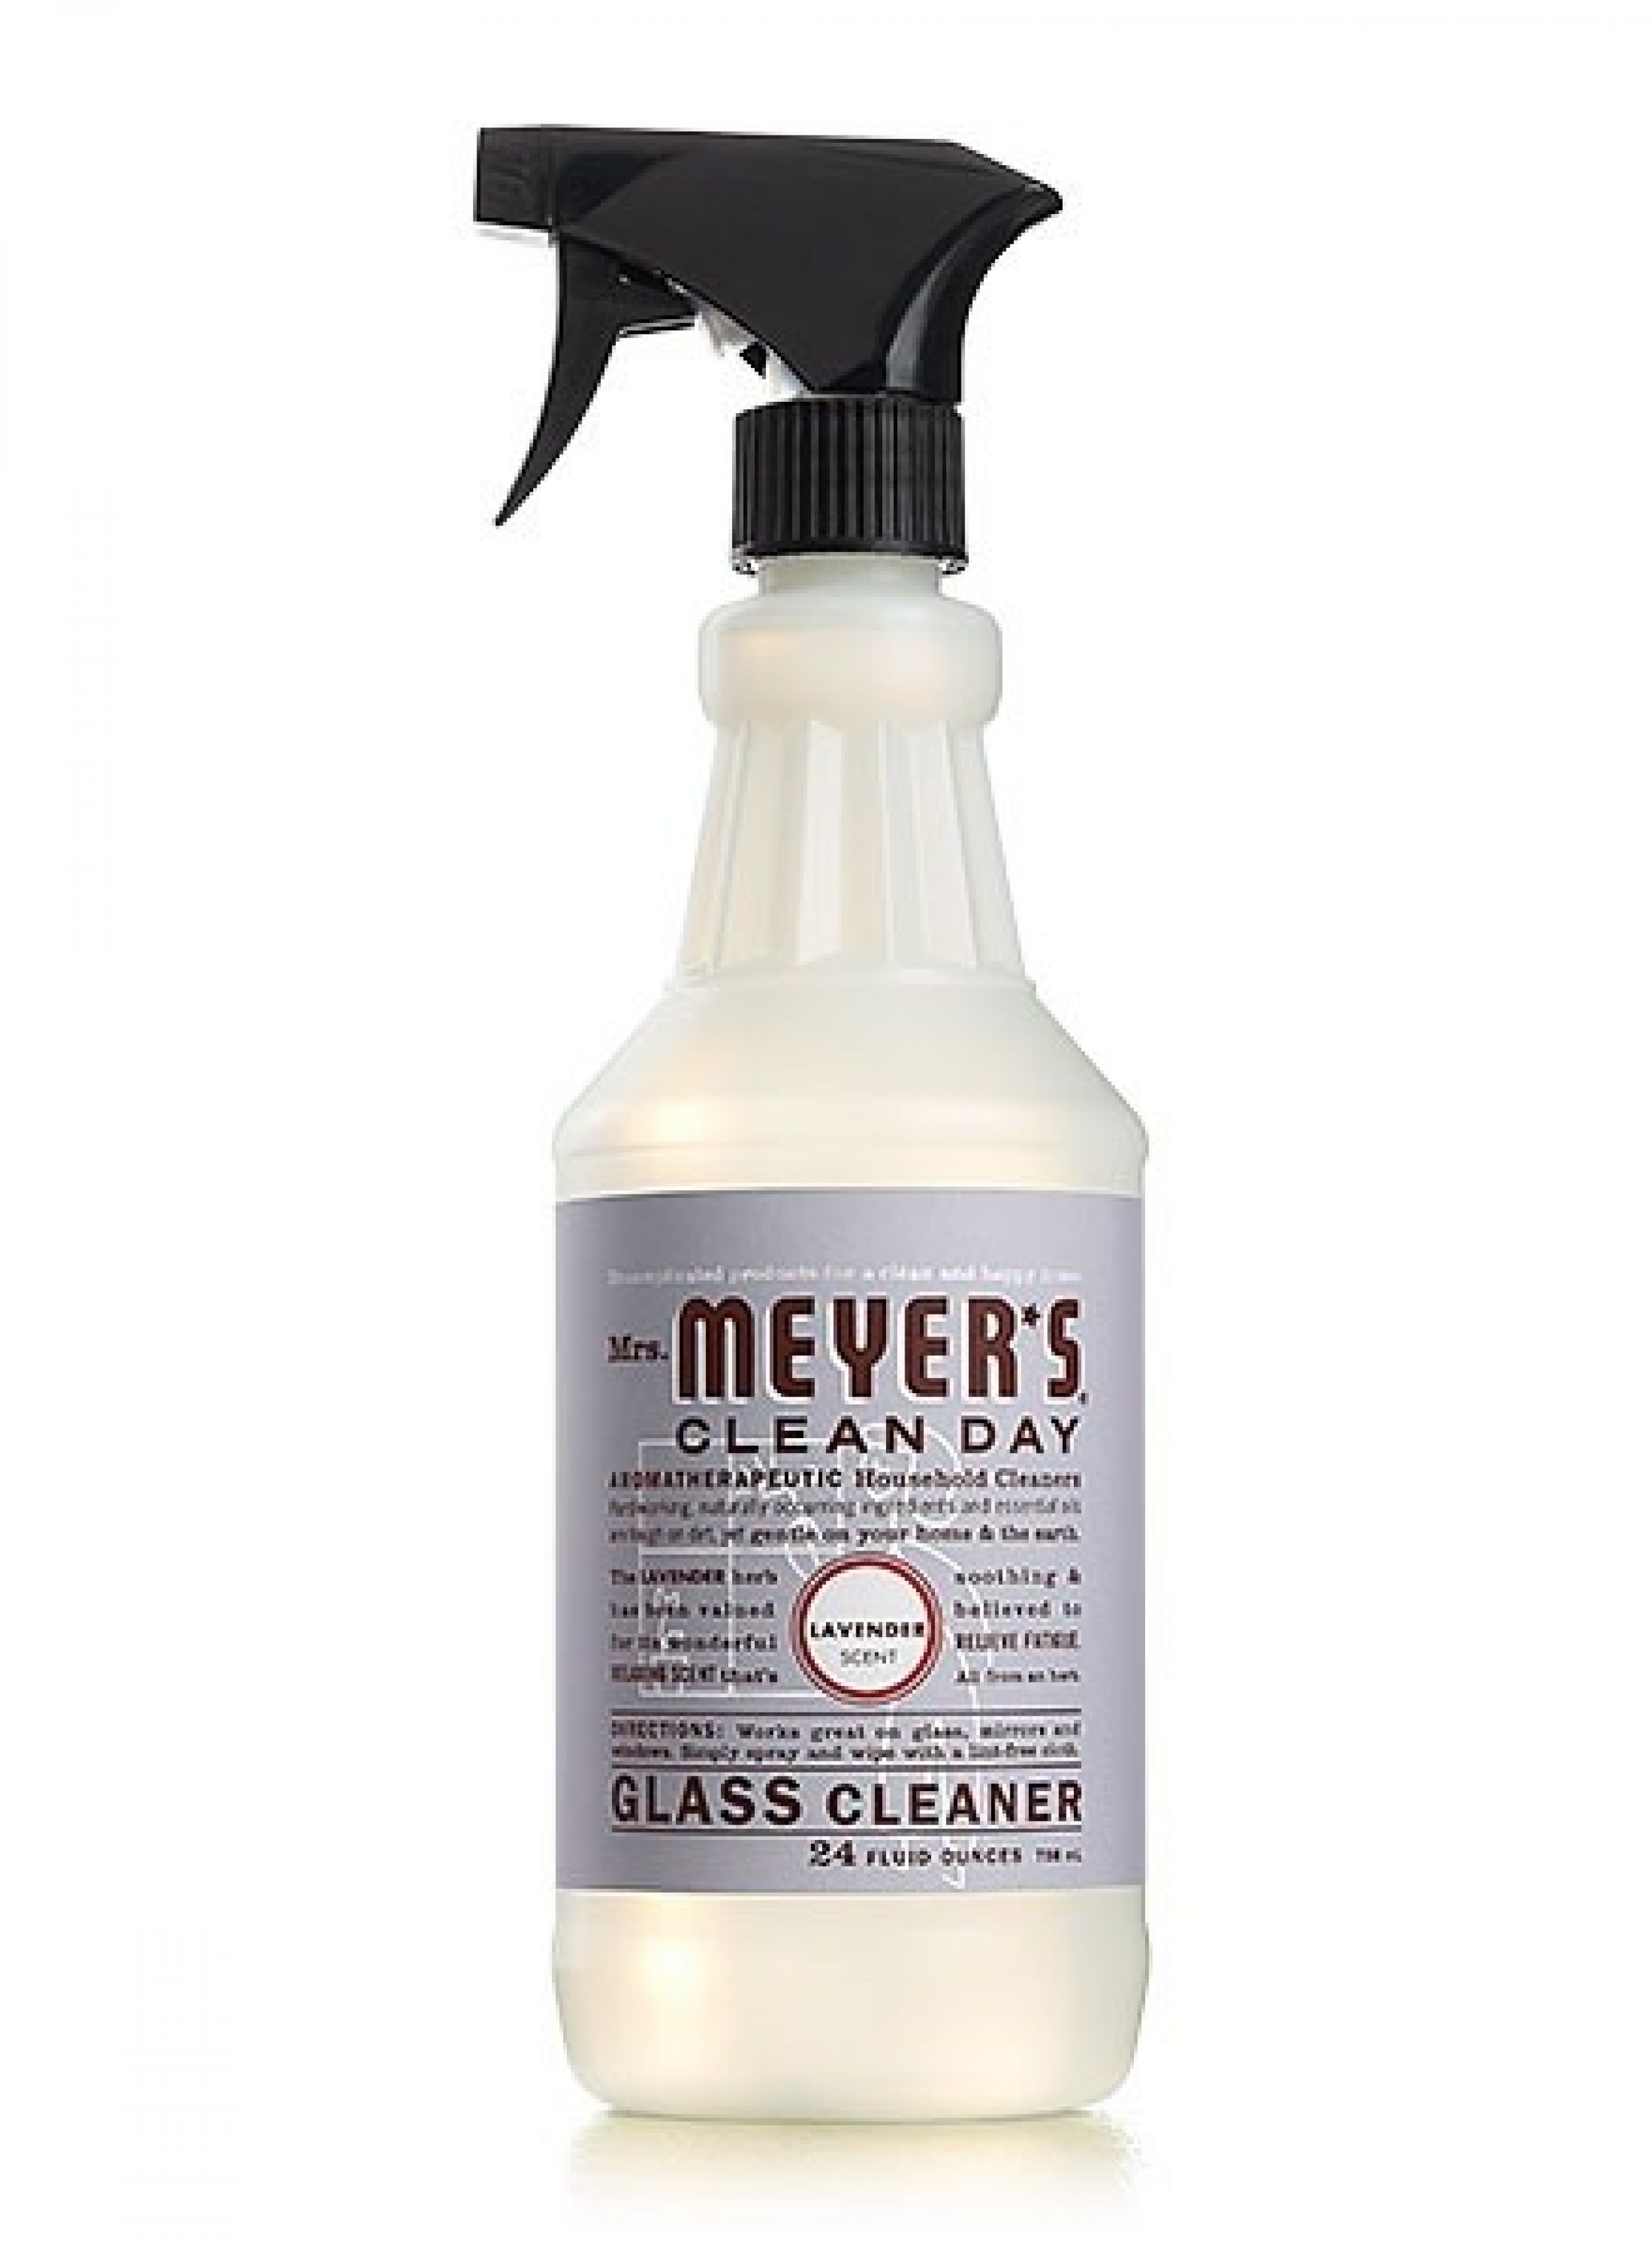 Mrs. Meyers Clean Day Glass Cleaner